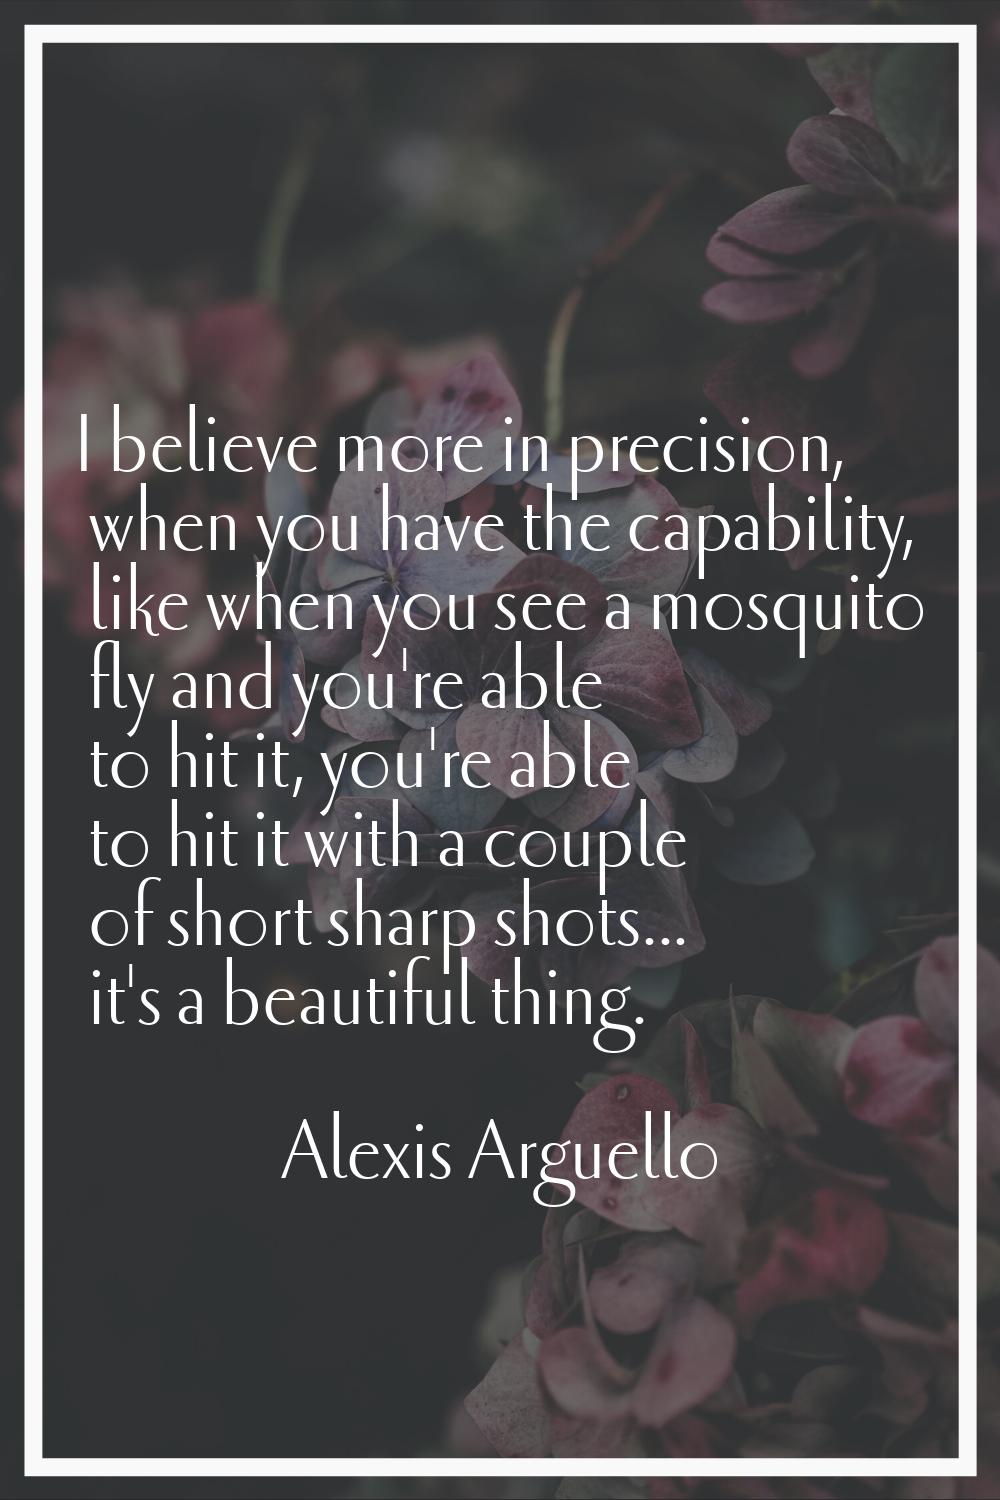 I believe more in precision, when you have the capability, like when you see a mosquito fly and you